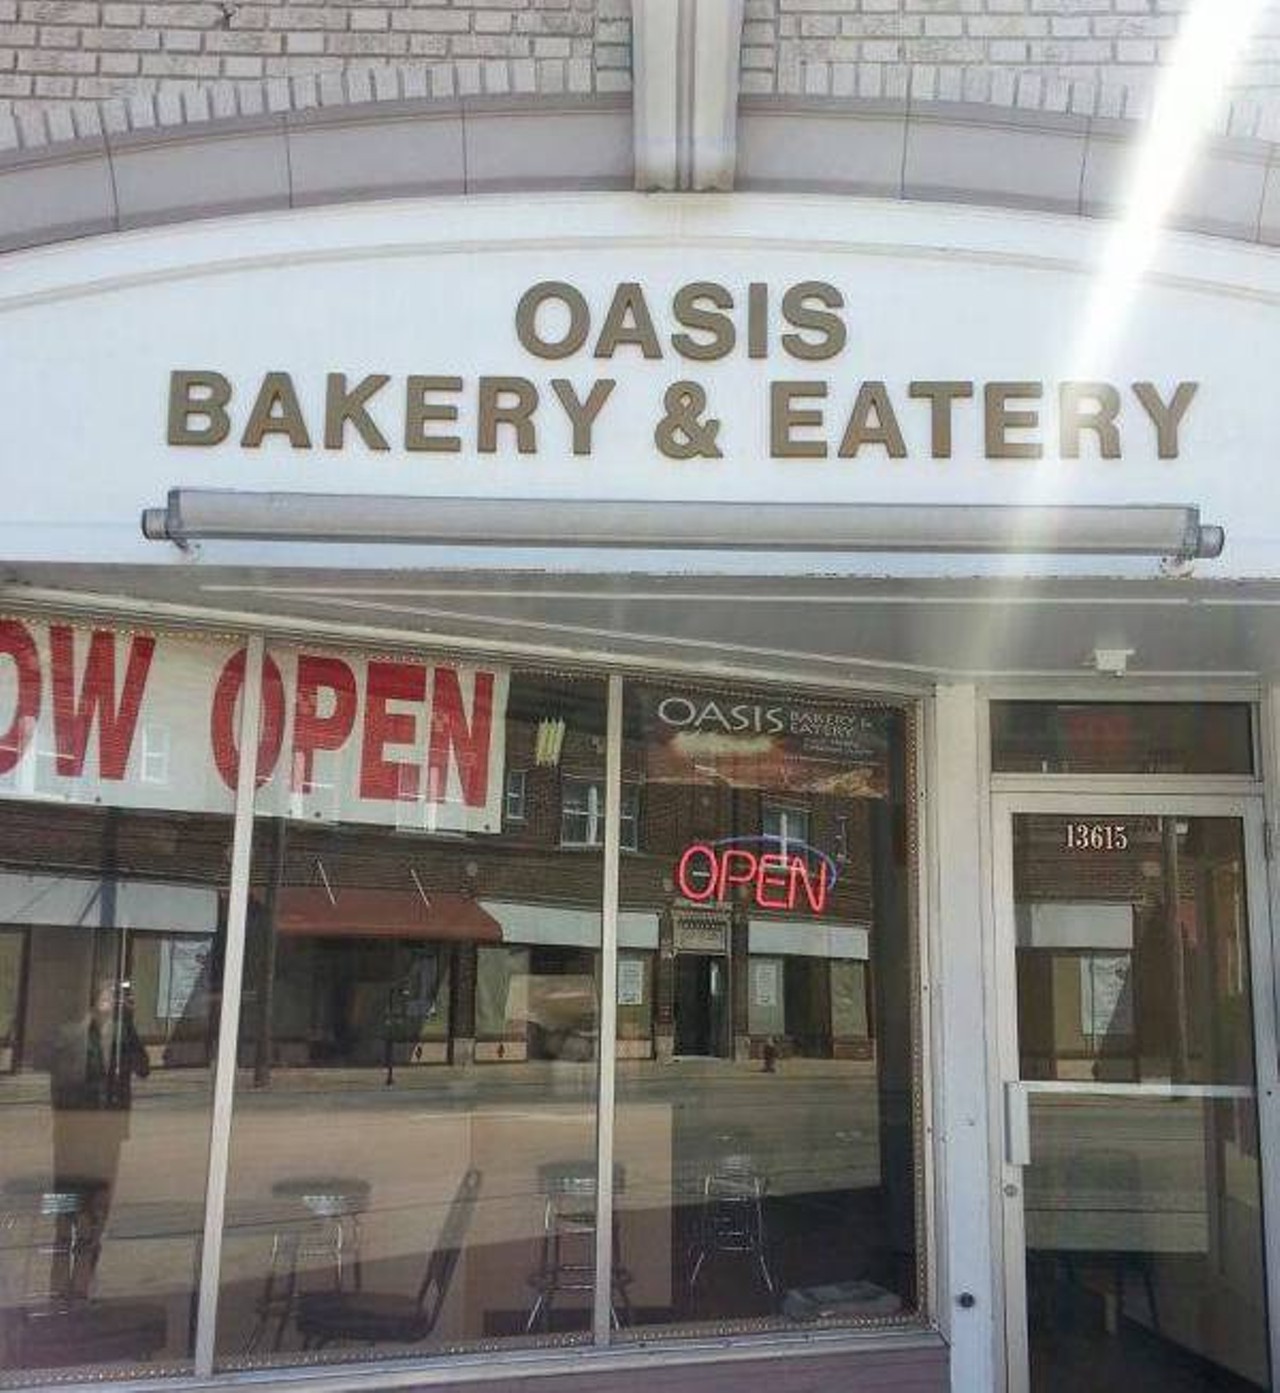  Oasis Bakery and Eatery
13614 Detroit Ave., Lakewood
This Middle Eastern bakery and eatery in the heart of Lakewood is one of our favorites around. Their oven baked savory pies are out of this world.
Photo via Oasis Bakery and Eatery/Facebook